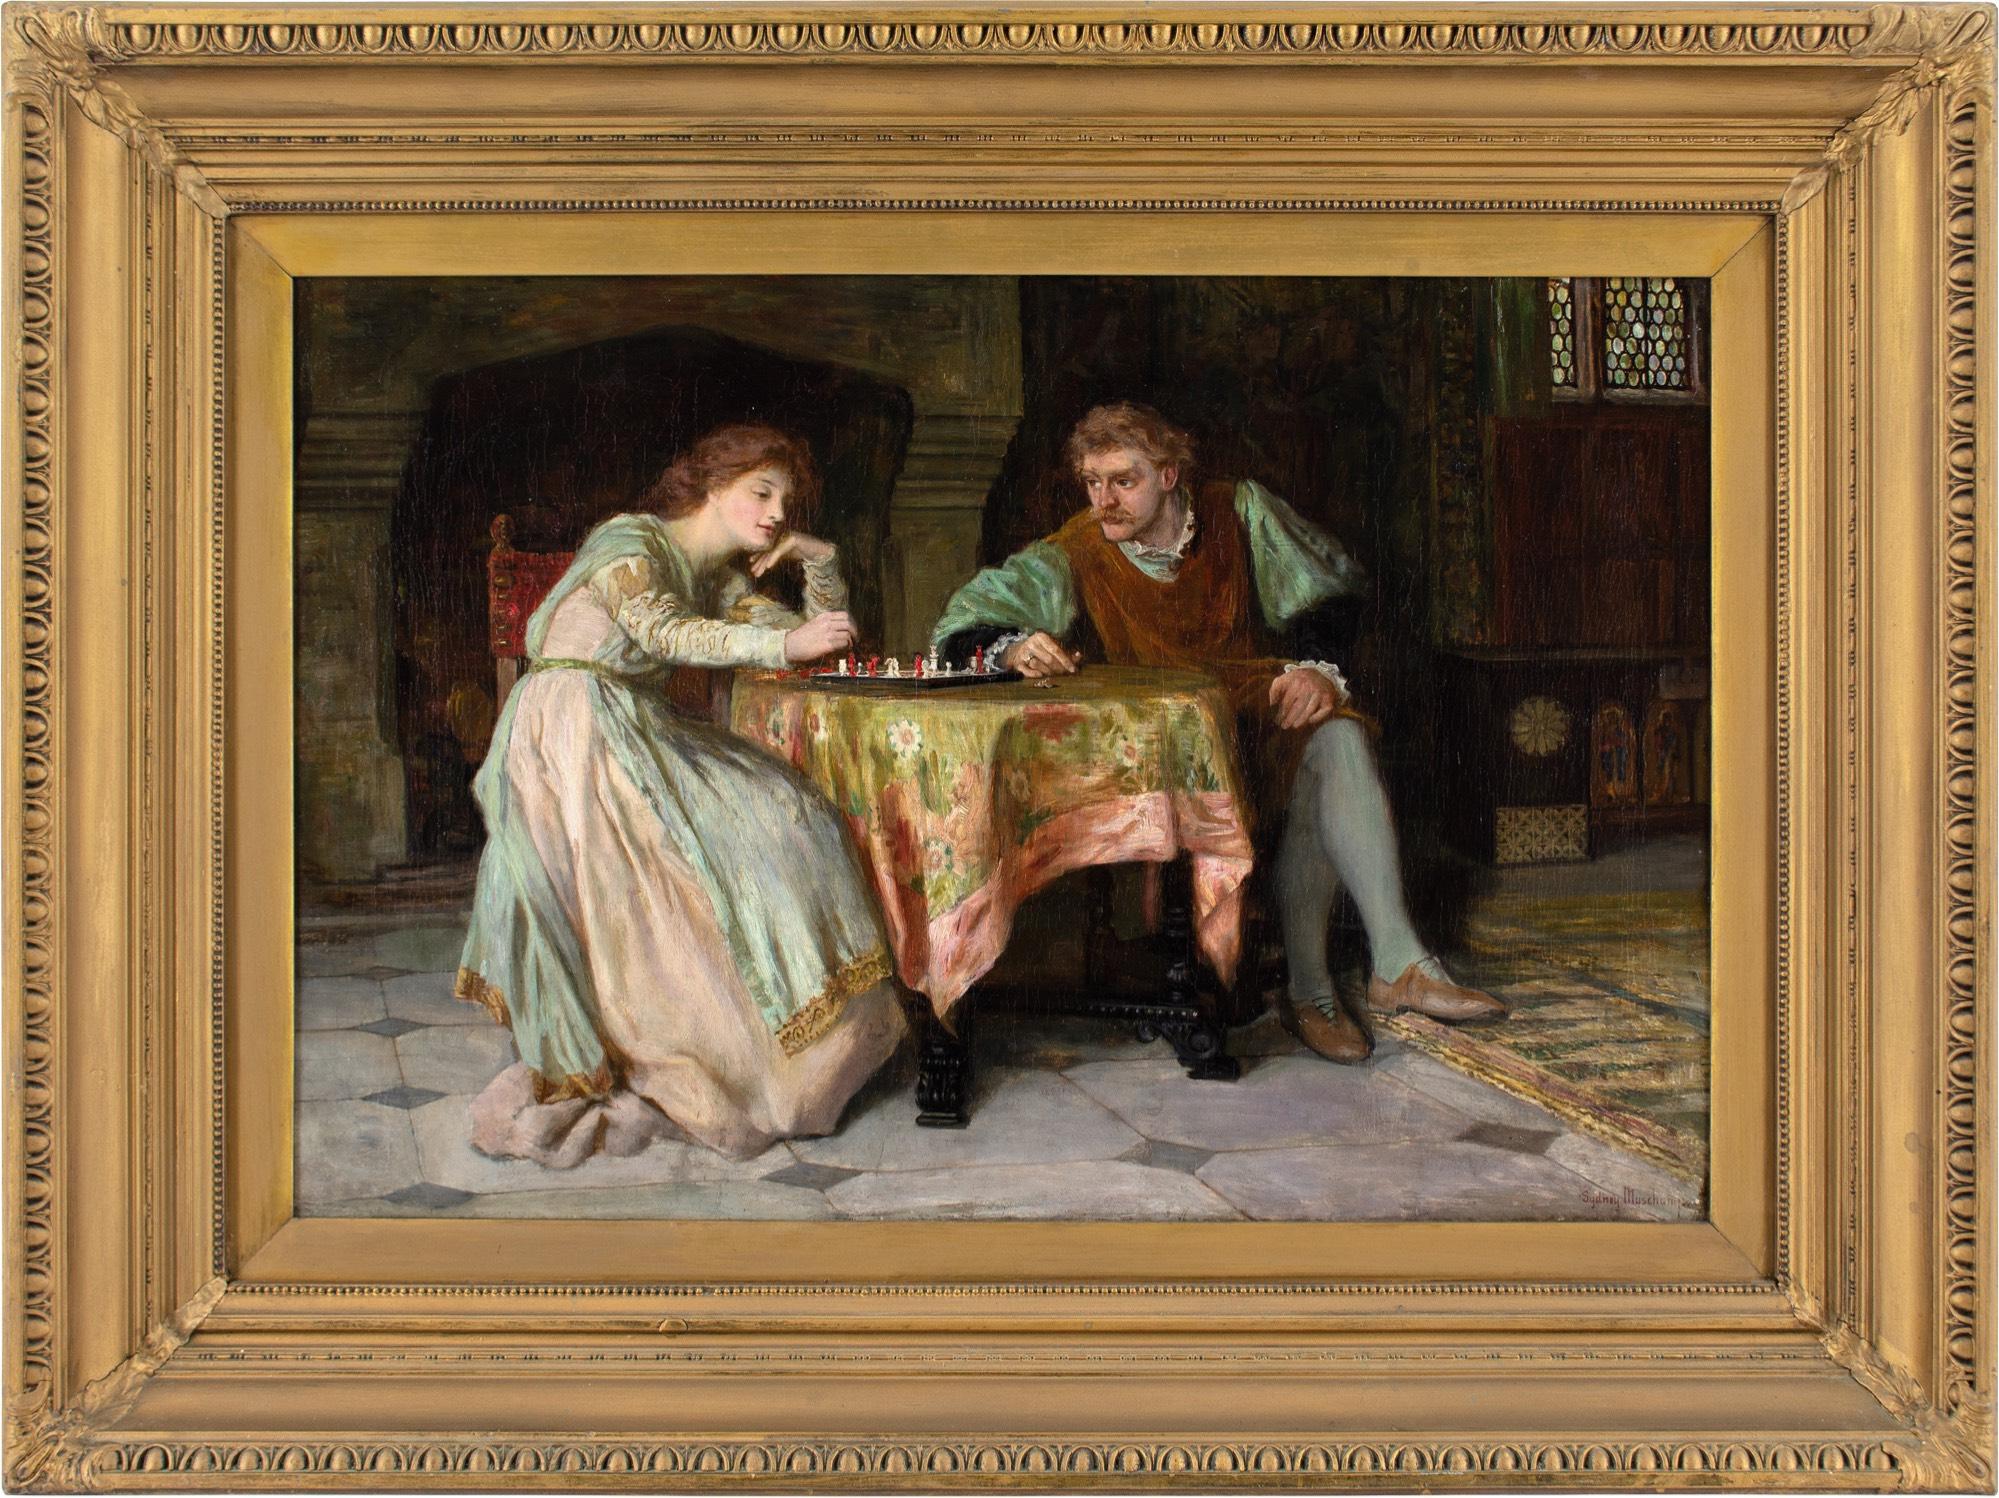 This late 19th-century oil painting by British artist Francis Sydney Muschamp RBA (1851-1929) depicts a mediaeval couple playing chess within a historic interior, perhaps a castle. Muschamp was predominantly known for his imagined domestic scenes